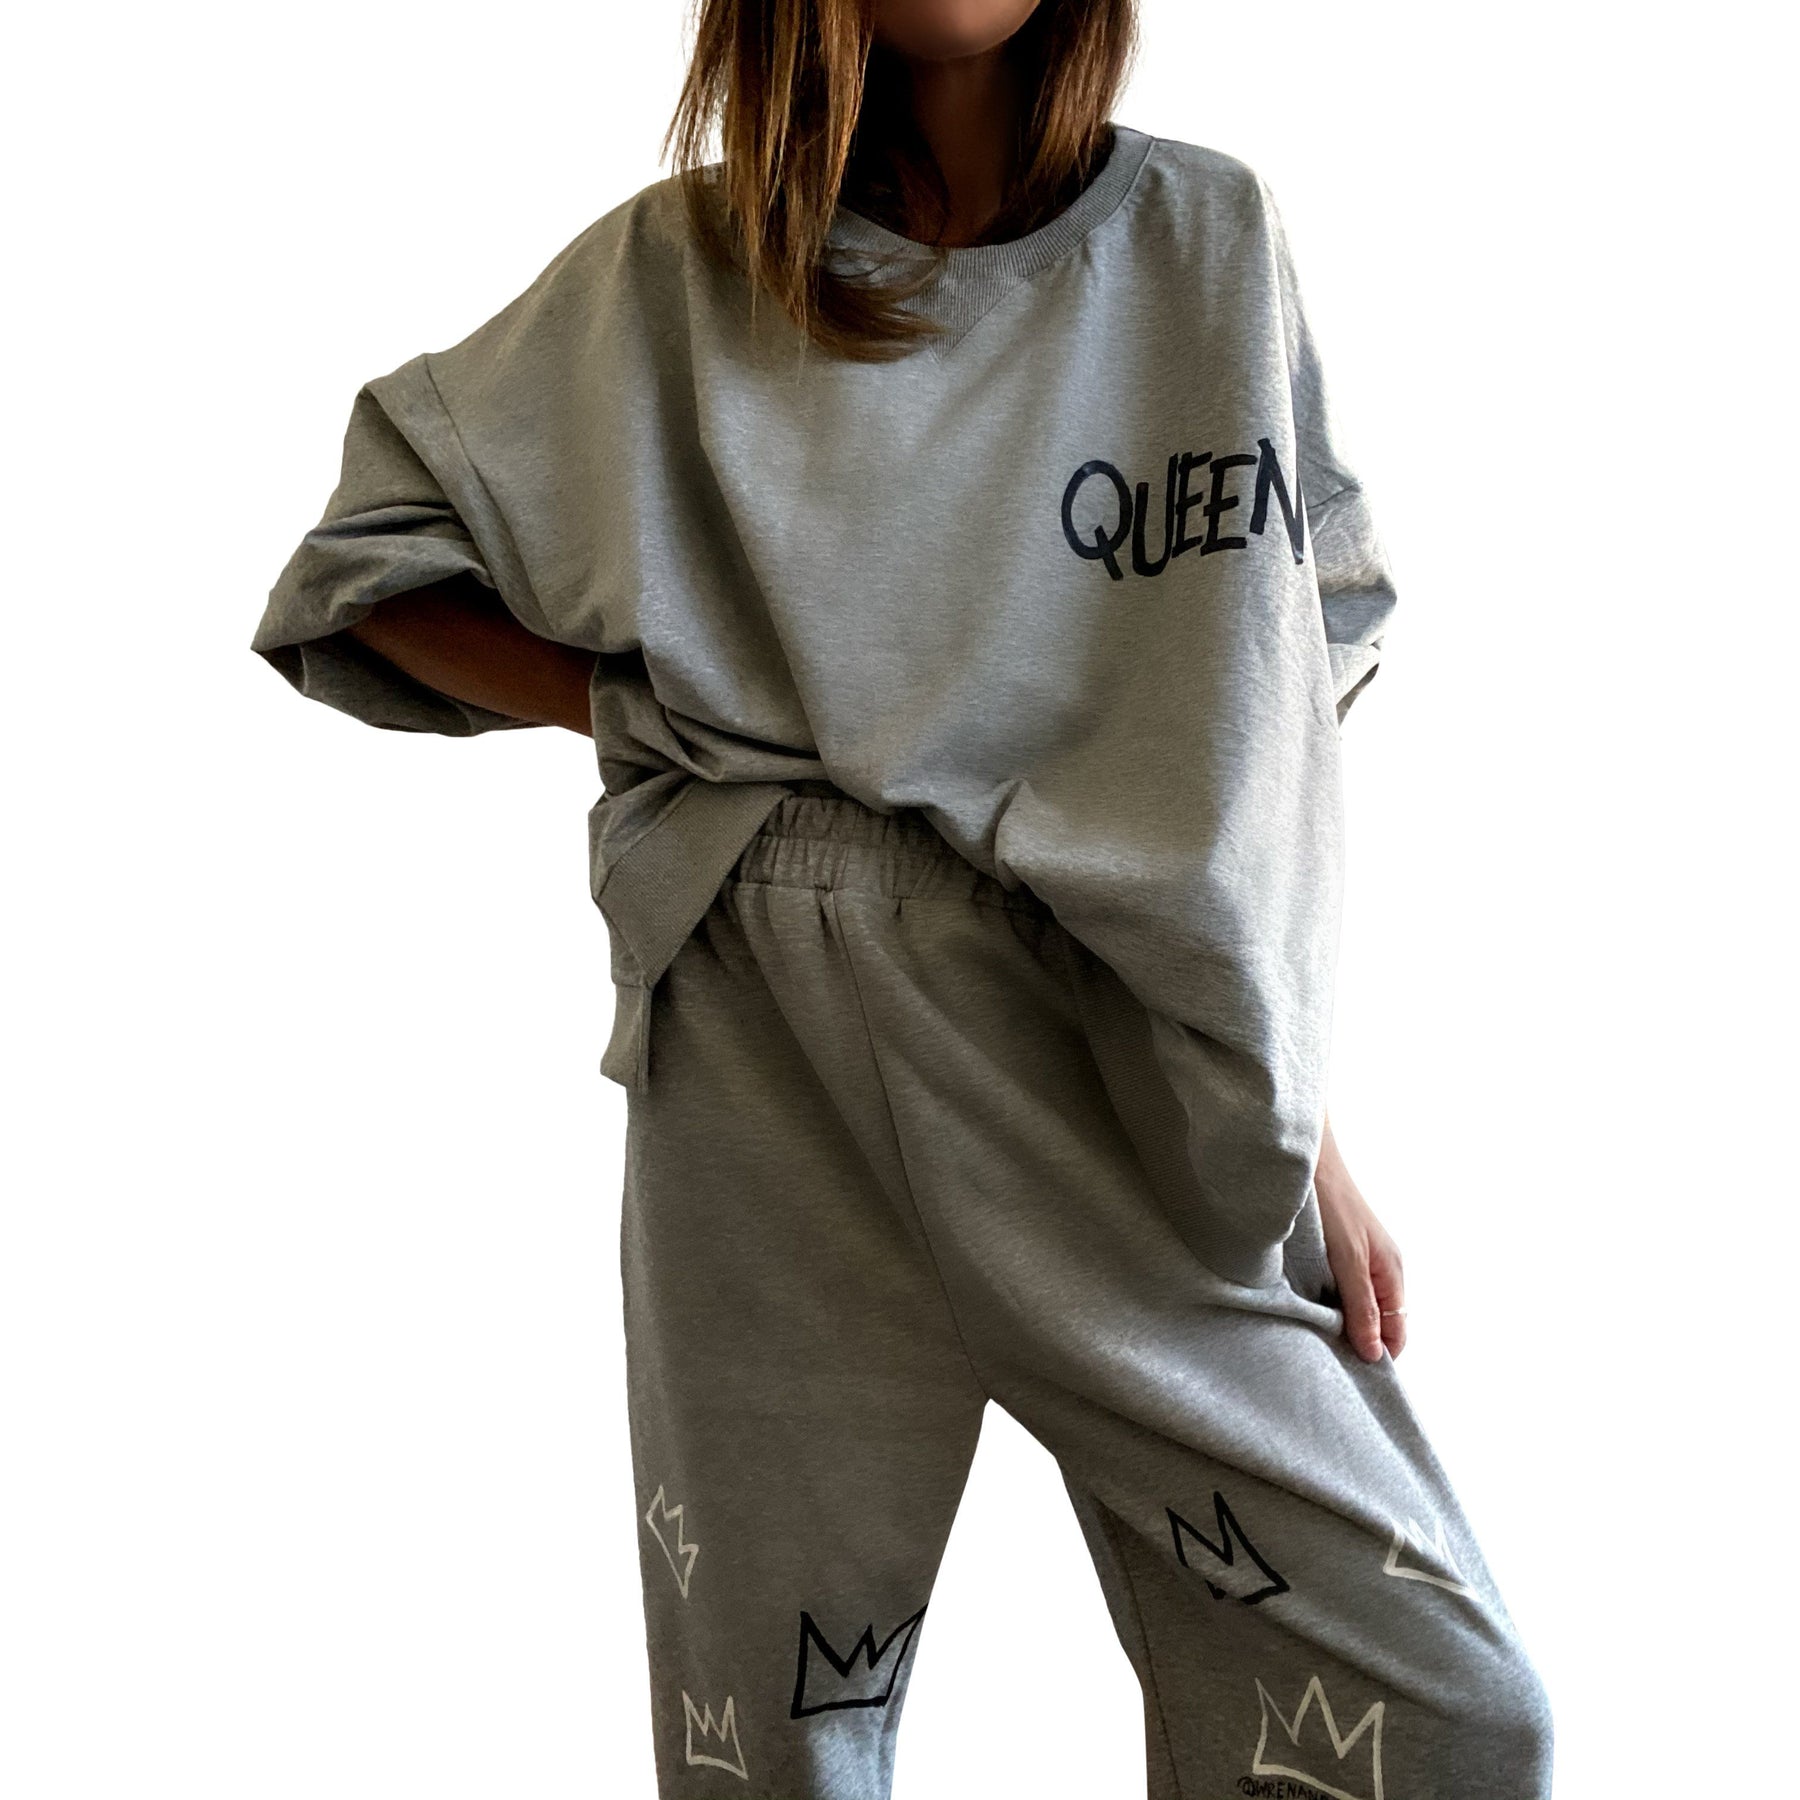 The perfect oversized sweatshirt & jogger loungewear set. TOP: Large crown painted on back in black, with white paint drips. QUEEN painted in black, on front left chest. BOTTOM: QUEEN painted on back going down leg in black, with white paint drips. Assorted sized crowns painted in black and white on front. Signed @wrenandglory on both top and bottom.